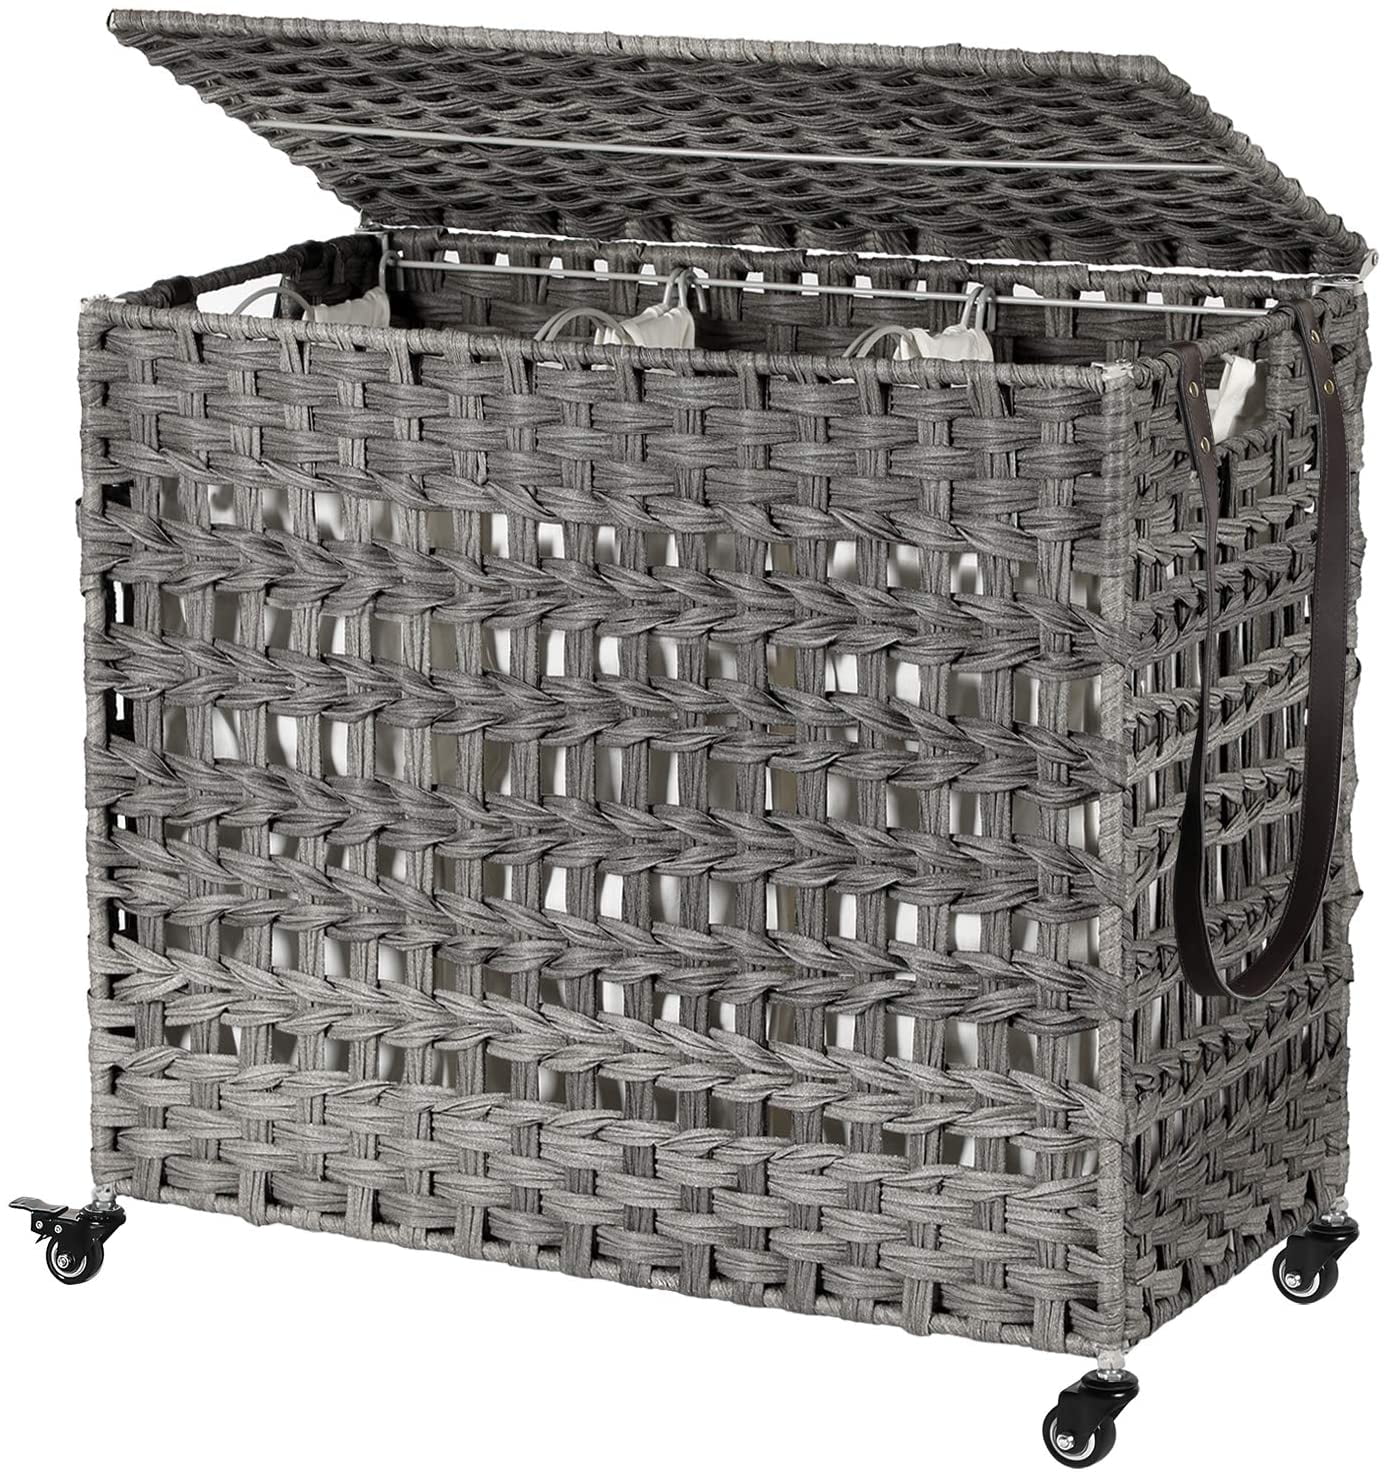 SONGMICS Fabric Double Laundry Hamper Separate Compartments Sorter 2 Sections Collapsible Clothes Storage Basket with Handles Detachable Lid and Liner Gray ULCB02G 